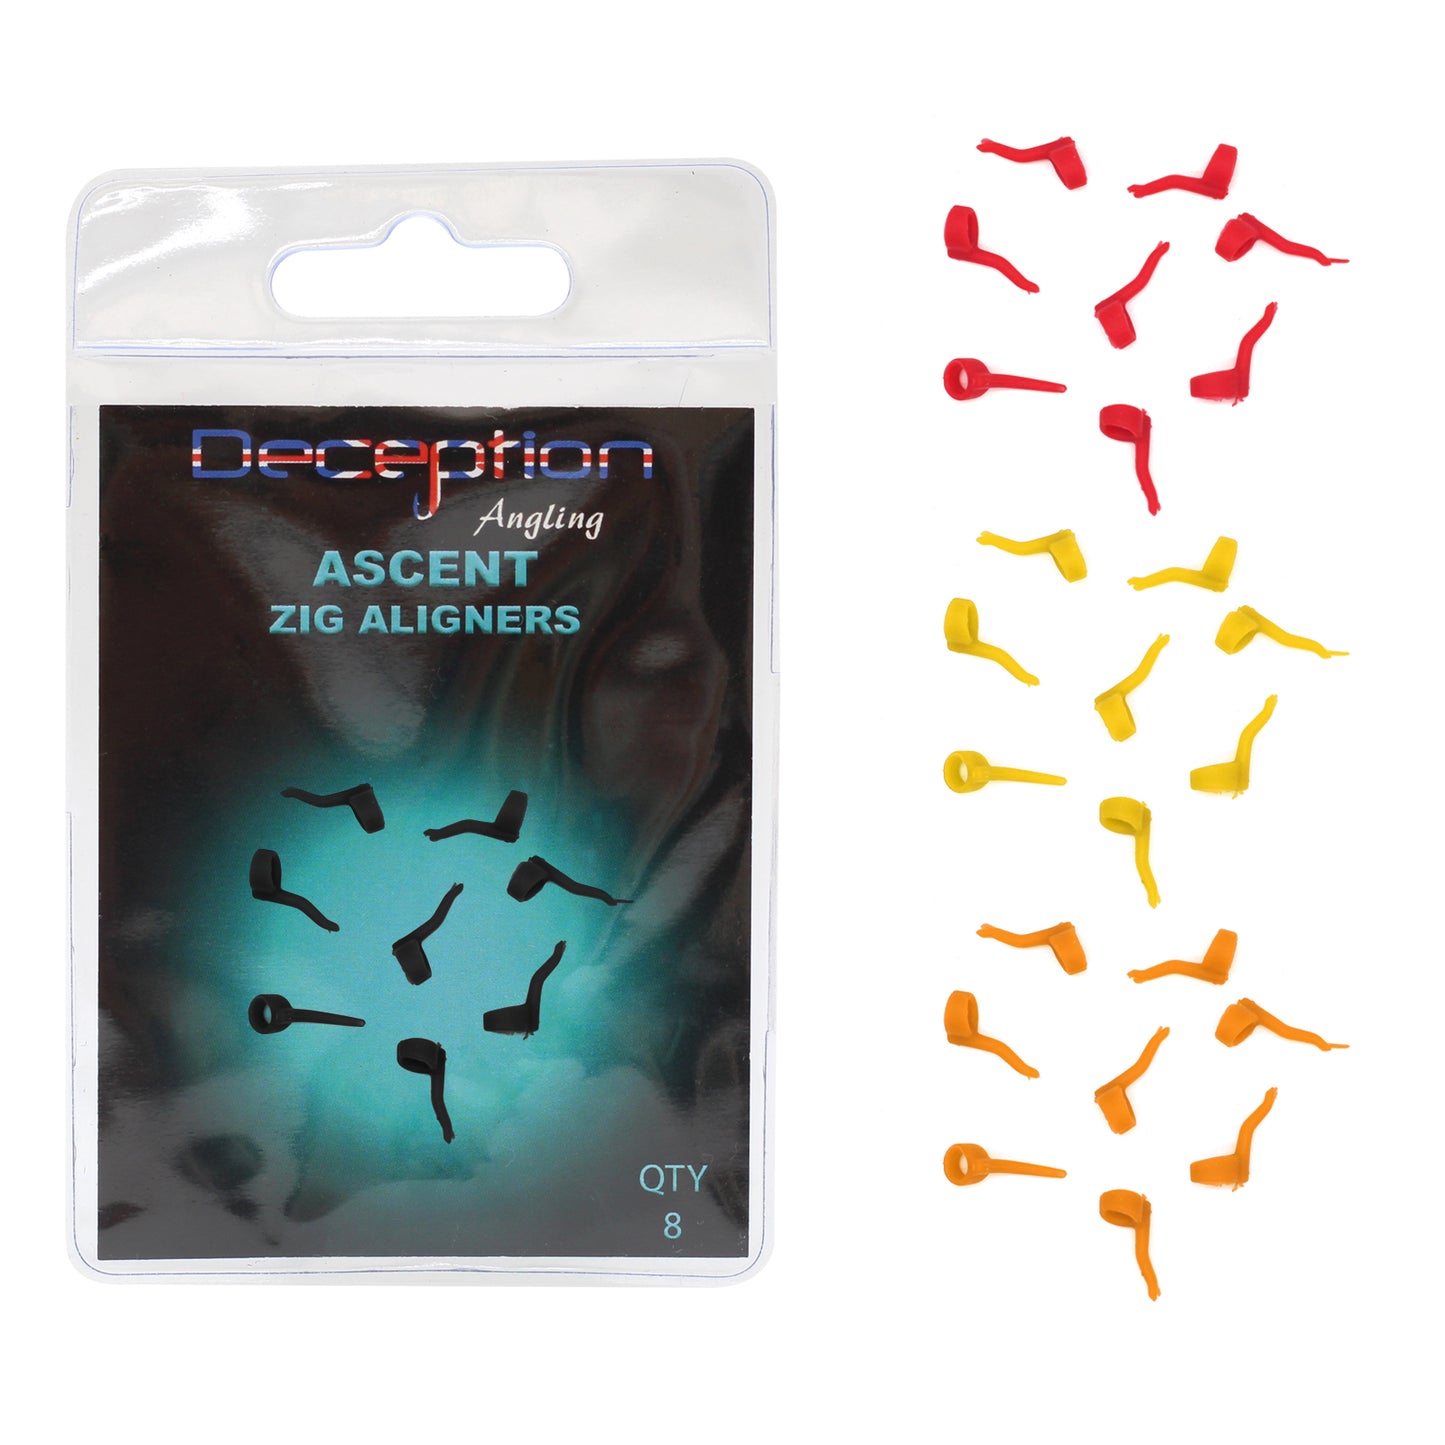 Deception Angling Ascent Zig Aligners for Fishing in Multiple Colour Options